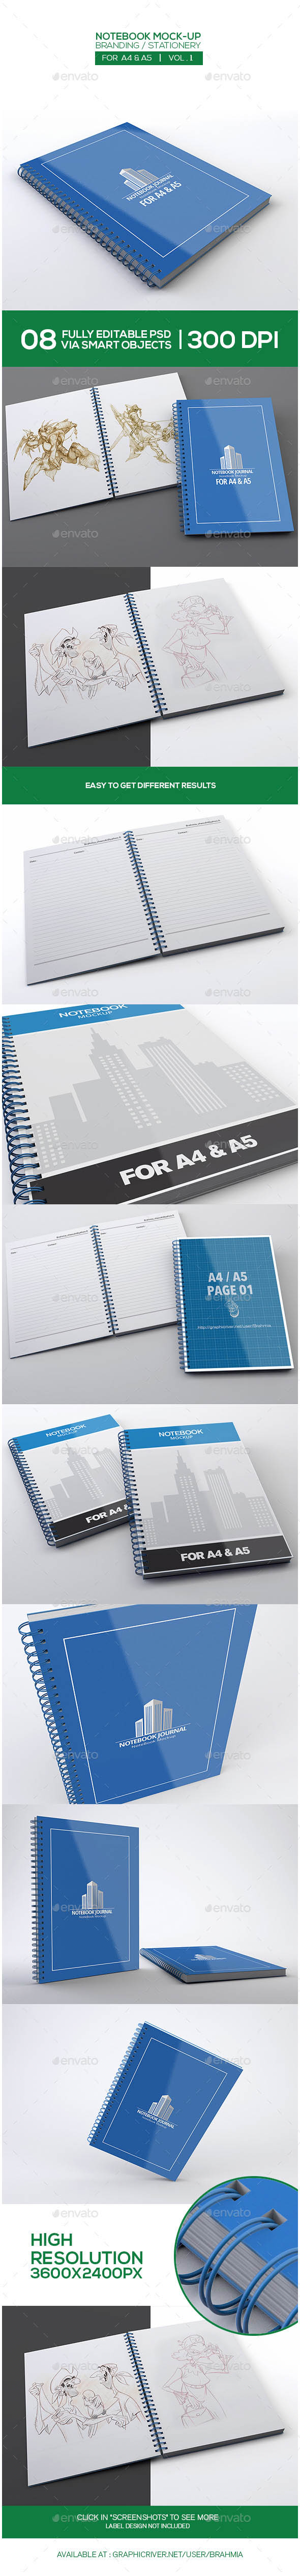 Notebook Mock-Up Preview.jpg